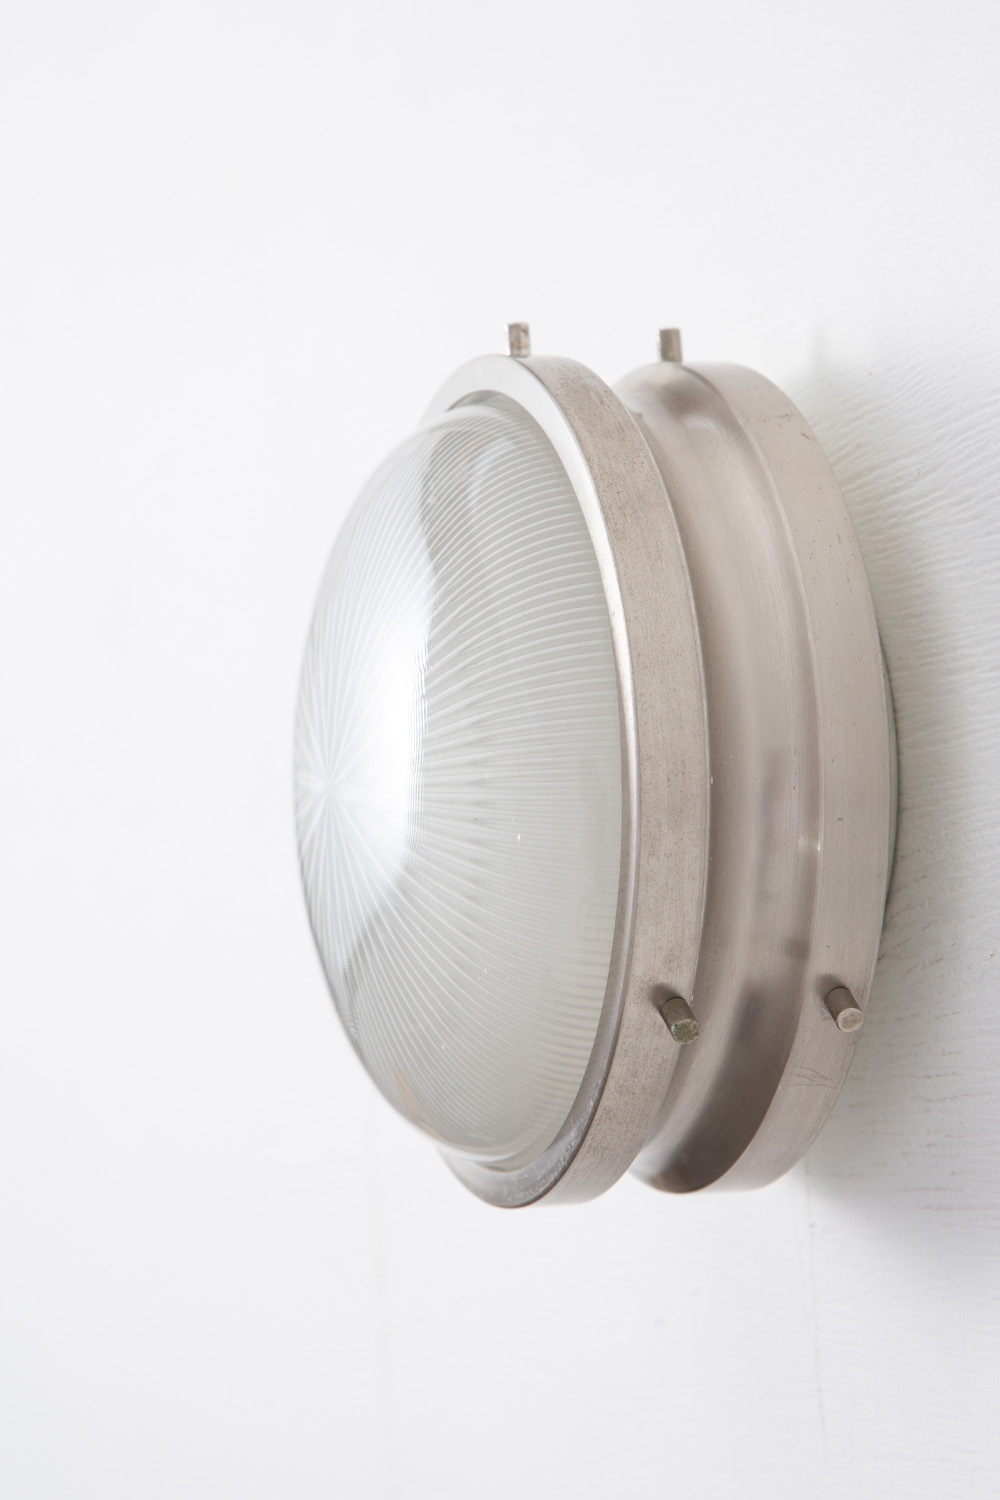 ‘Sigma’ Wall Ceiling Lamp by Sergio Mazza , Small for Artemide